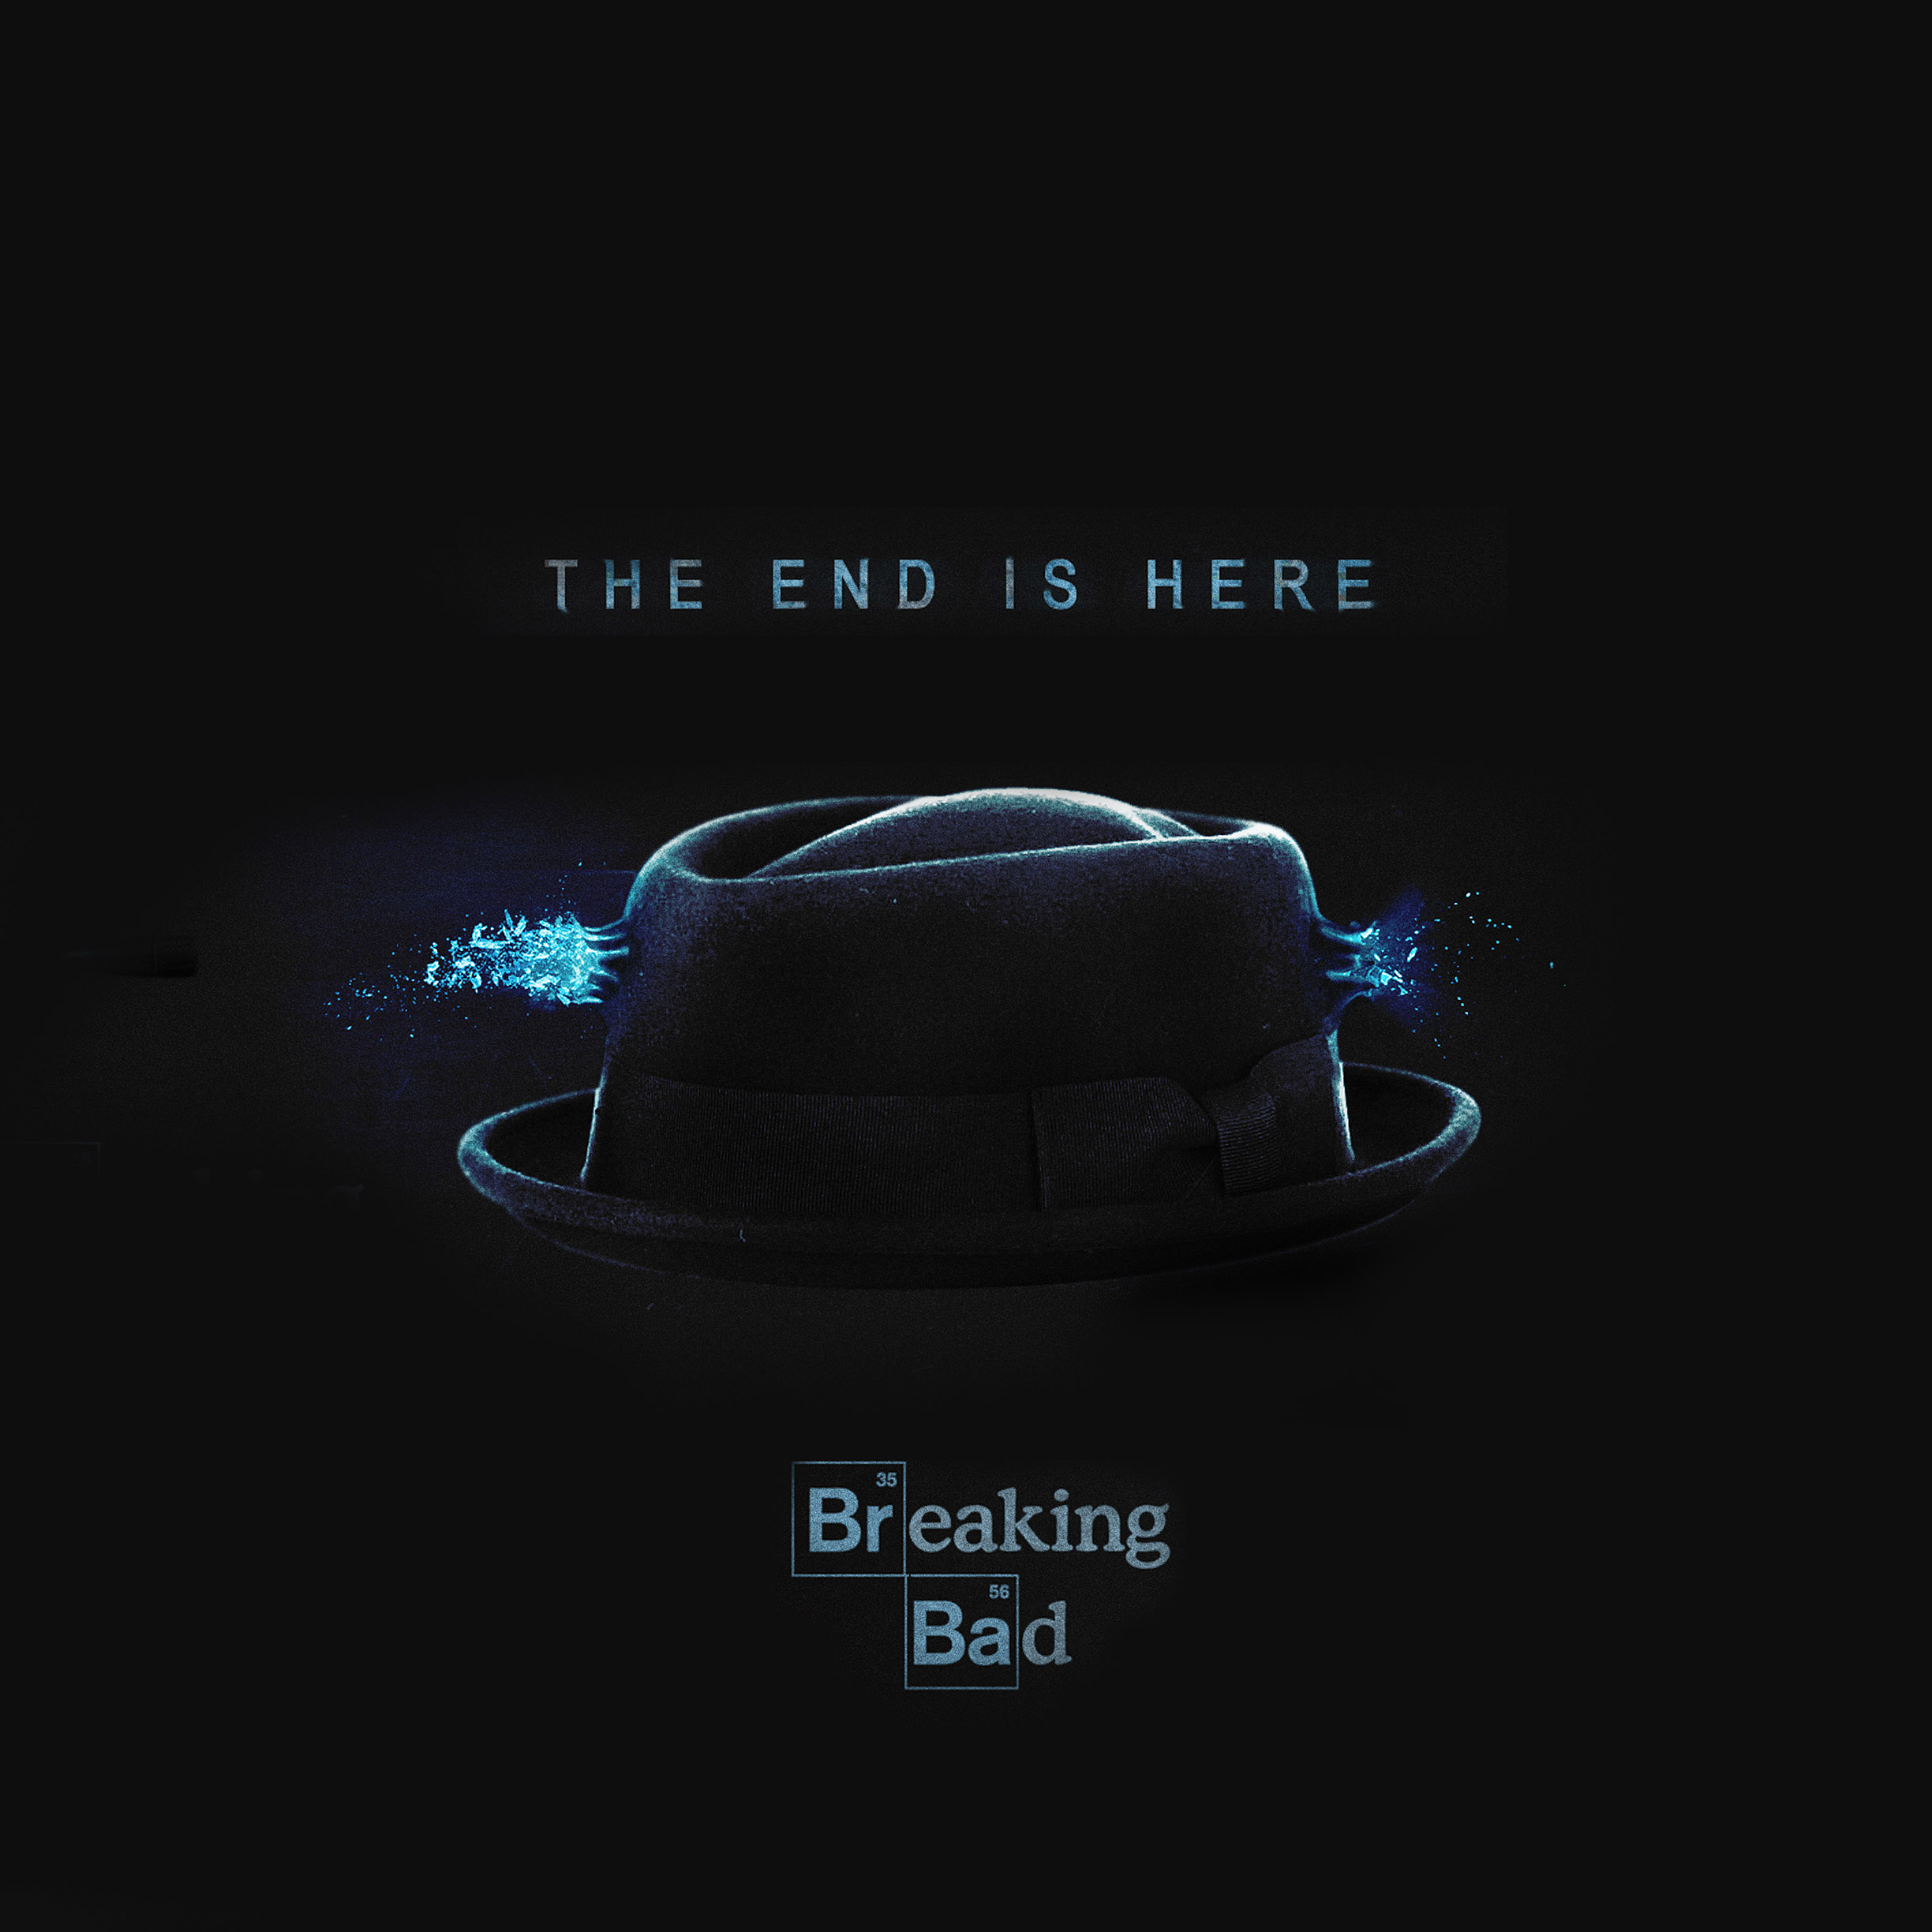 Breaking bad wallpapers for iphone and ipad